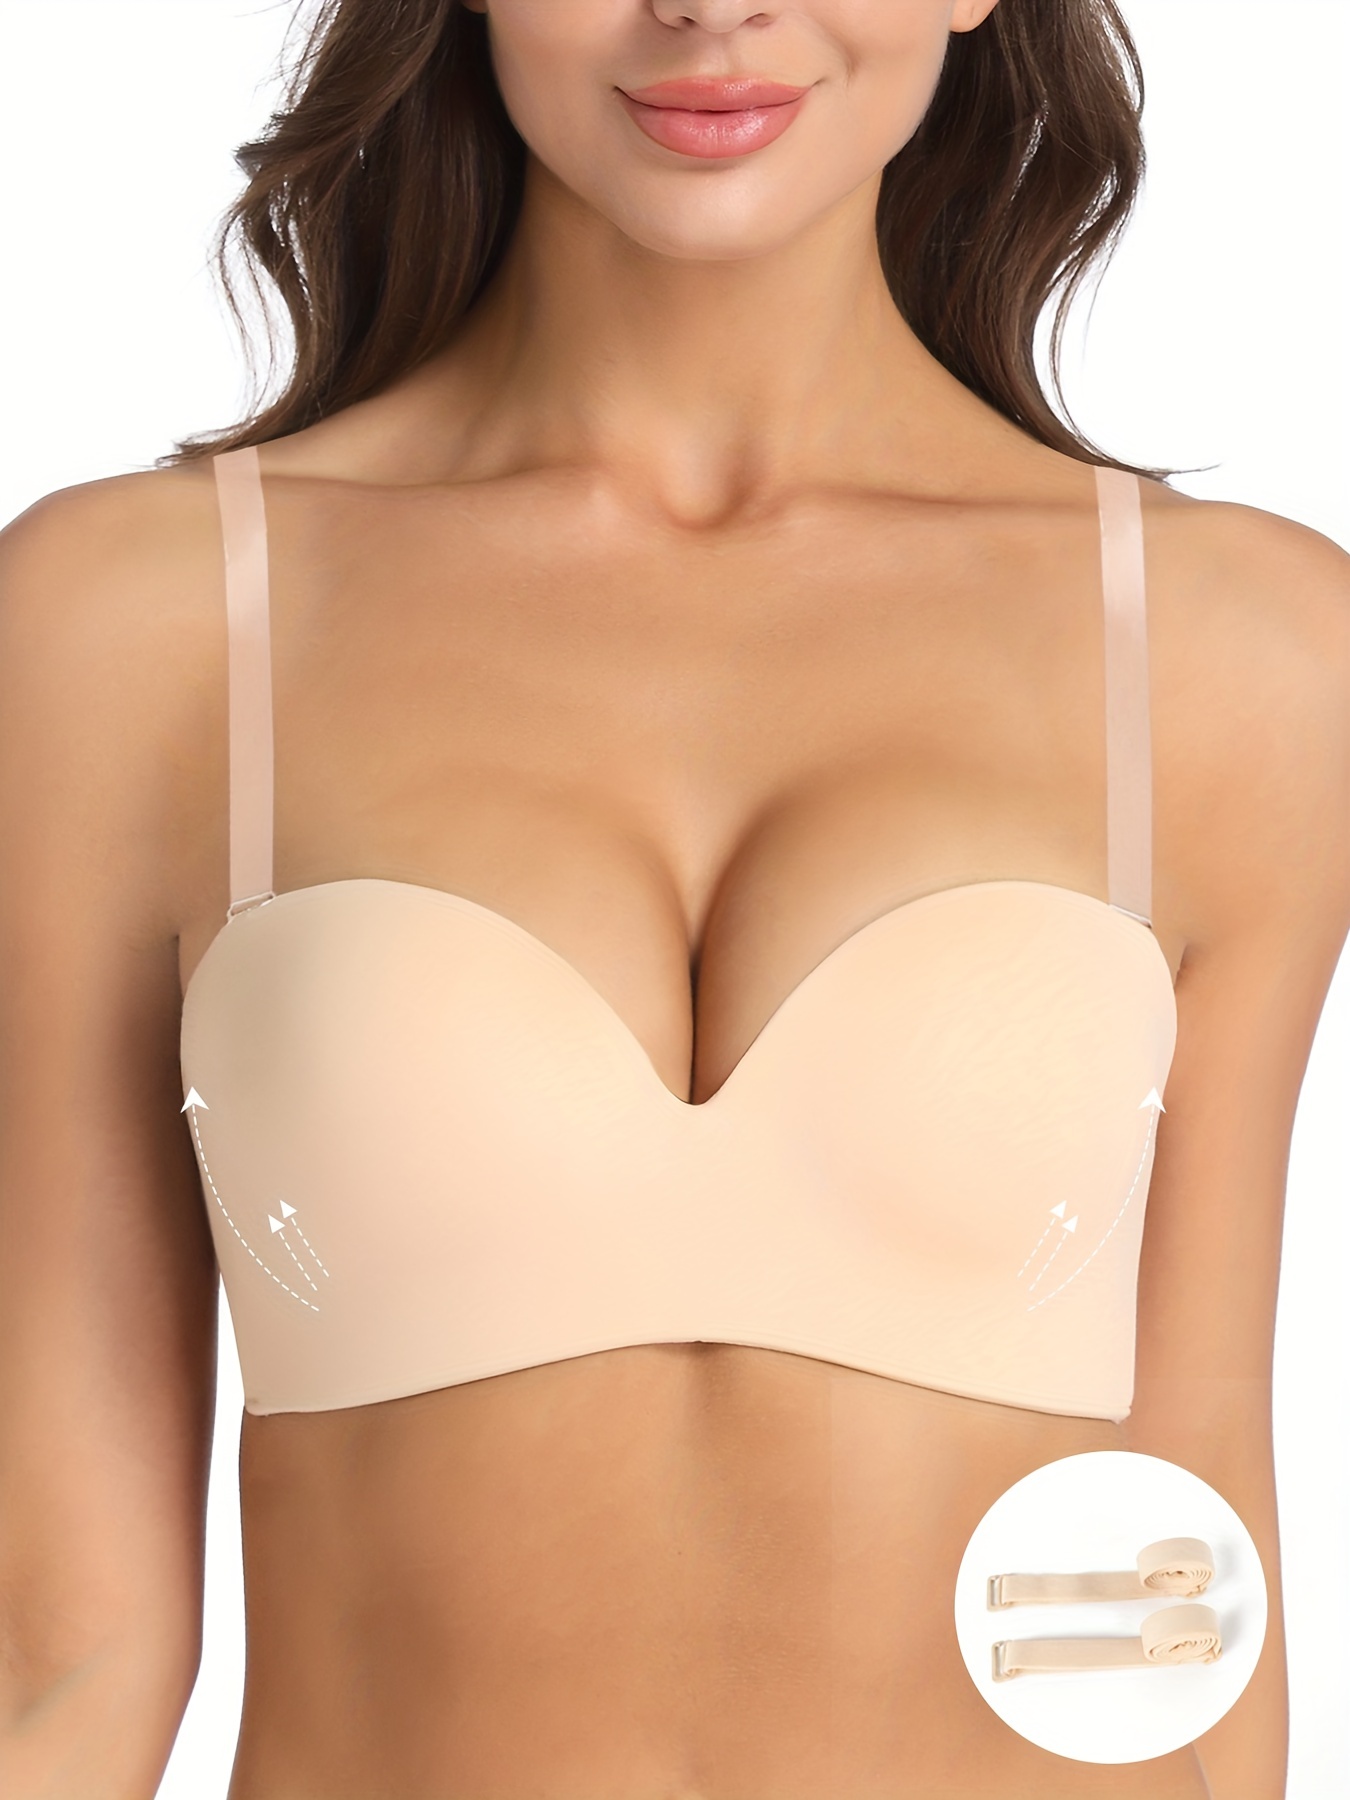 Great 2pcs Seamless Bras - Women Invisible Brassiere - Strapless Push